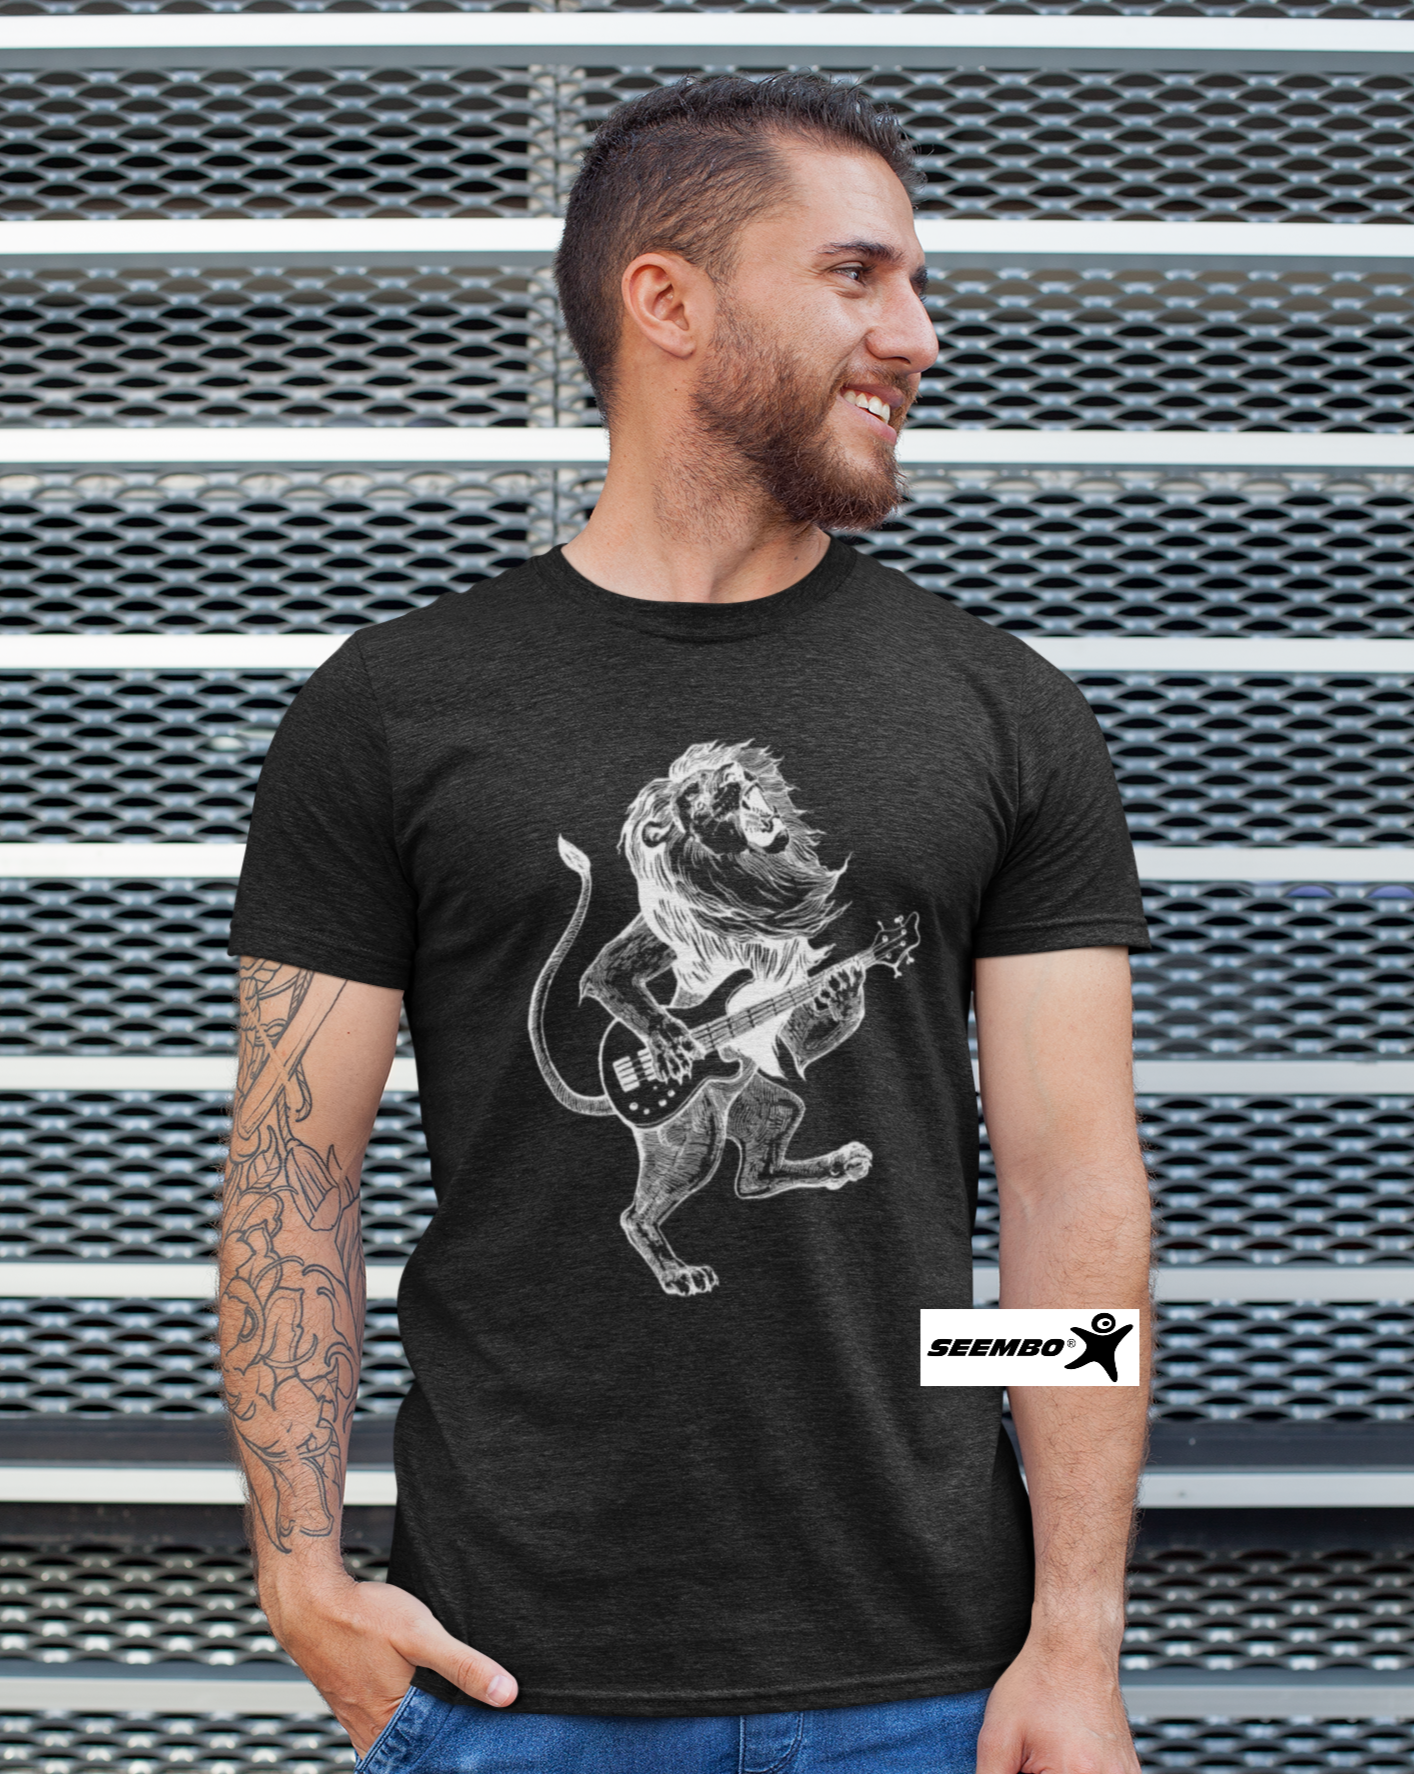 a-man-standing-with-seembo-t-shirt-with-lion-playing-guitar-guitarist-design-in-a-vintage-black-color